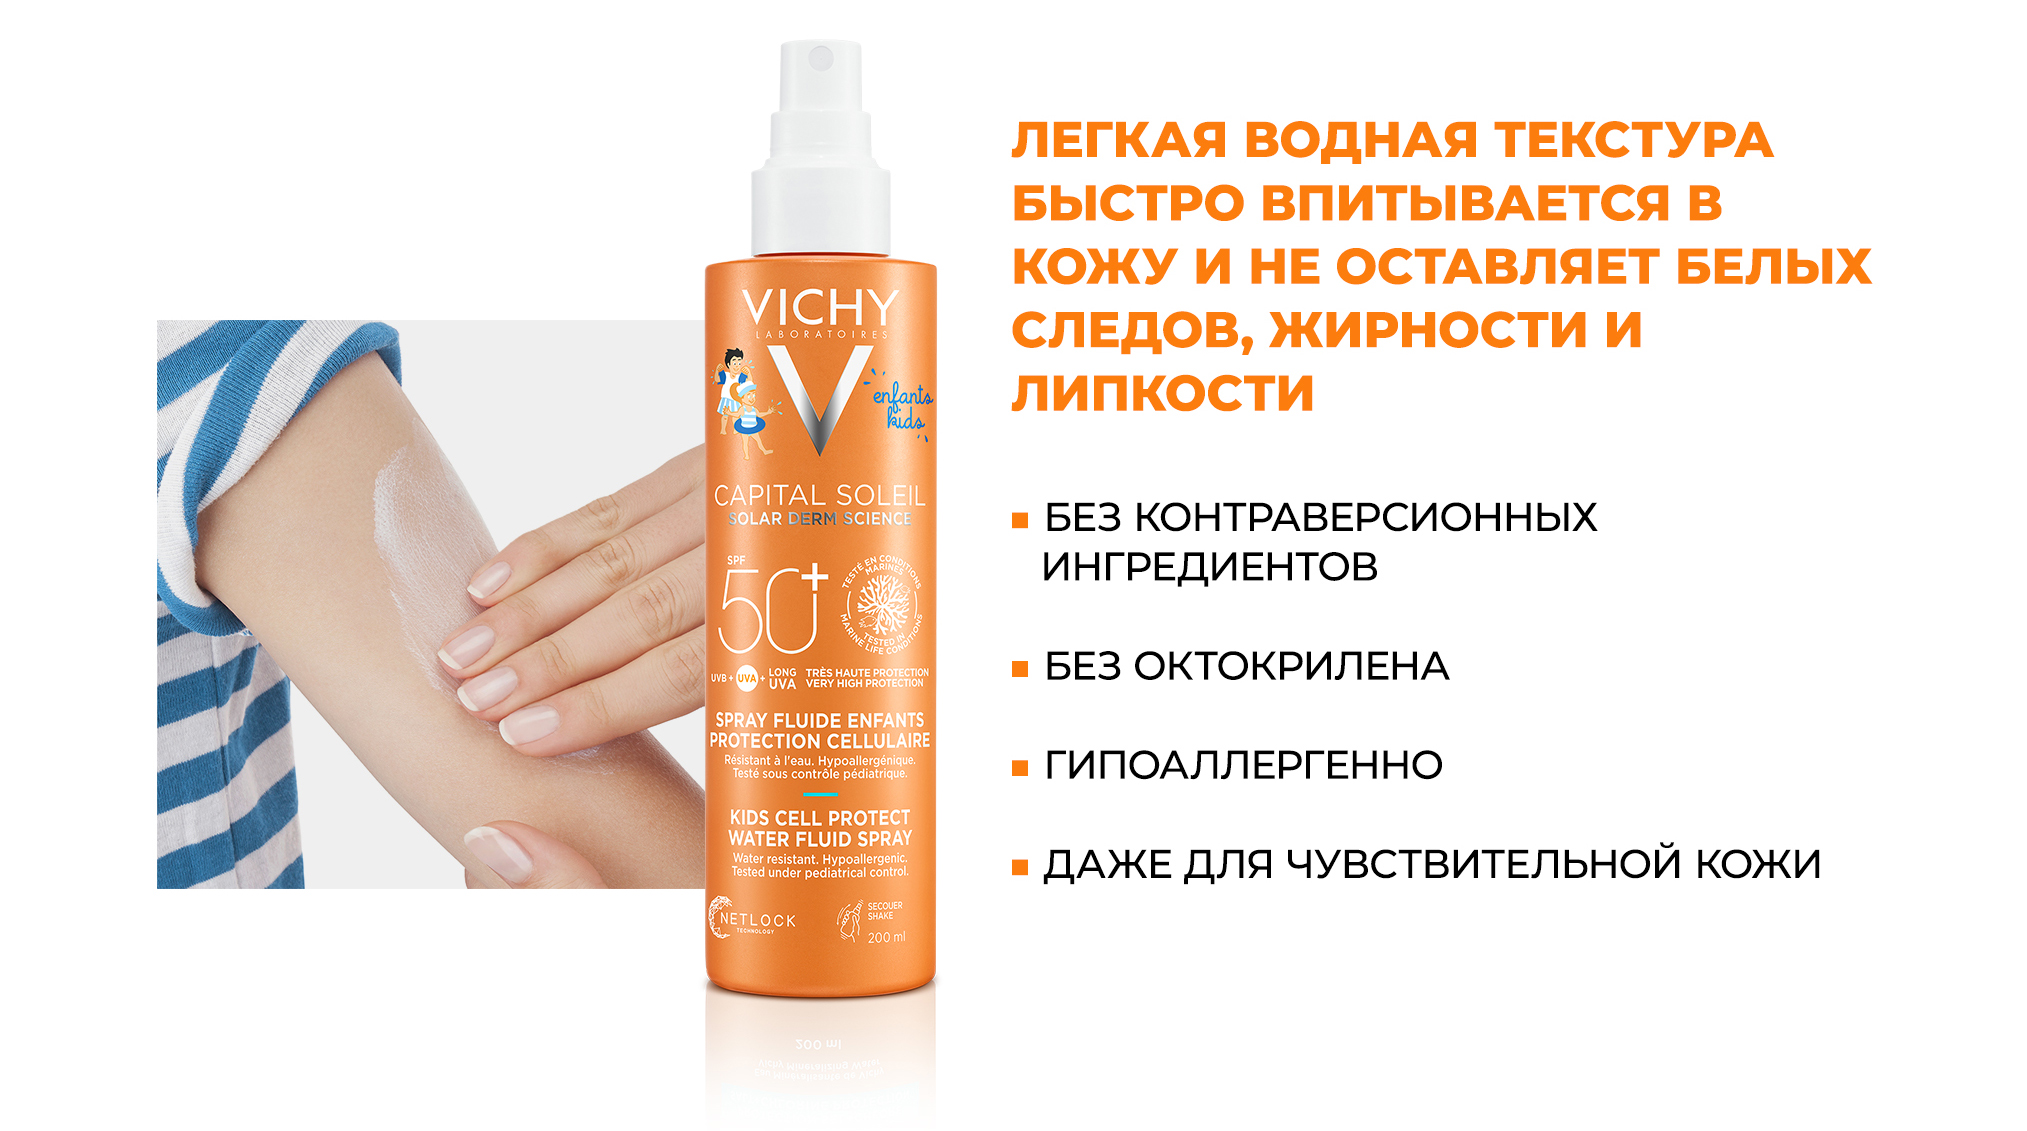 Vichy Capital Soleil Kids Cell Protect Water Fluid Spray